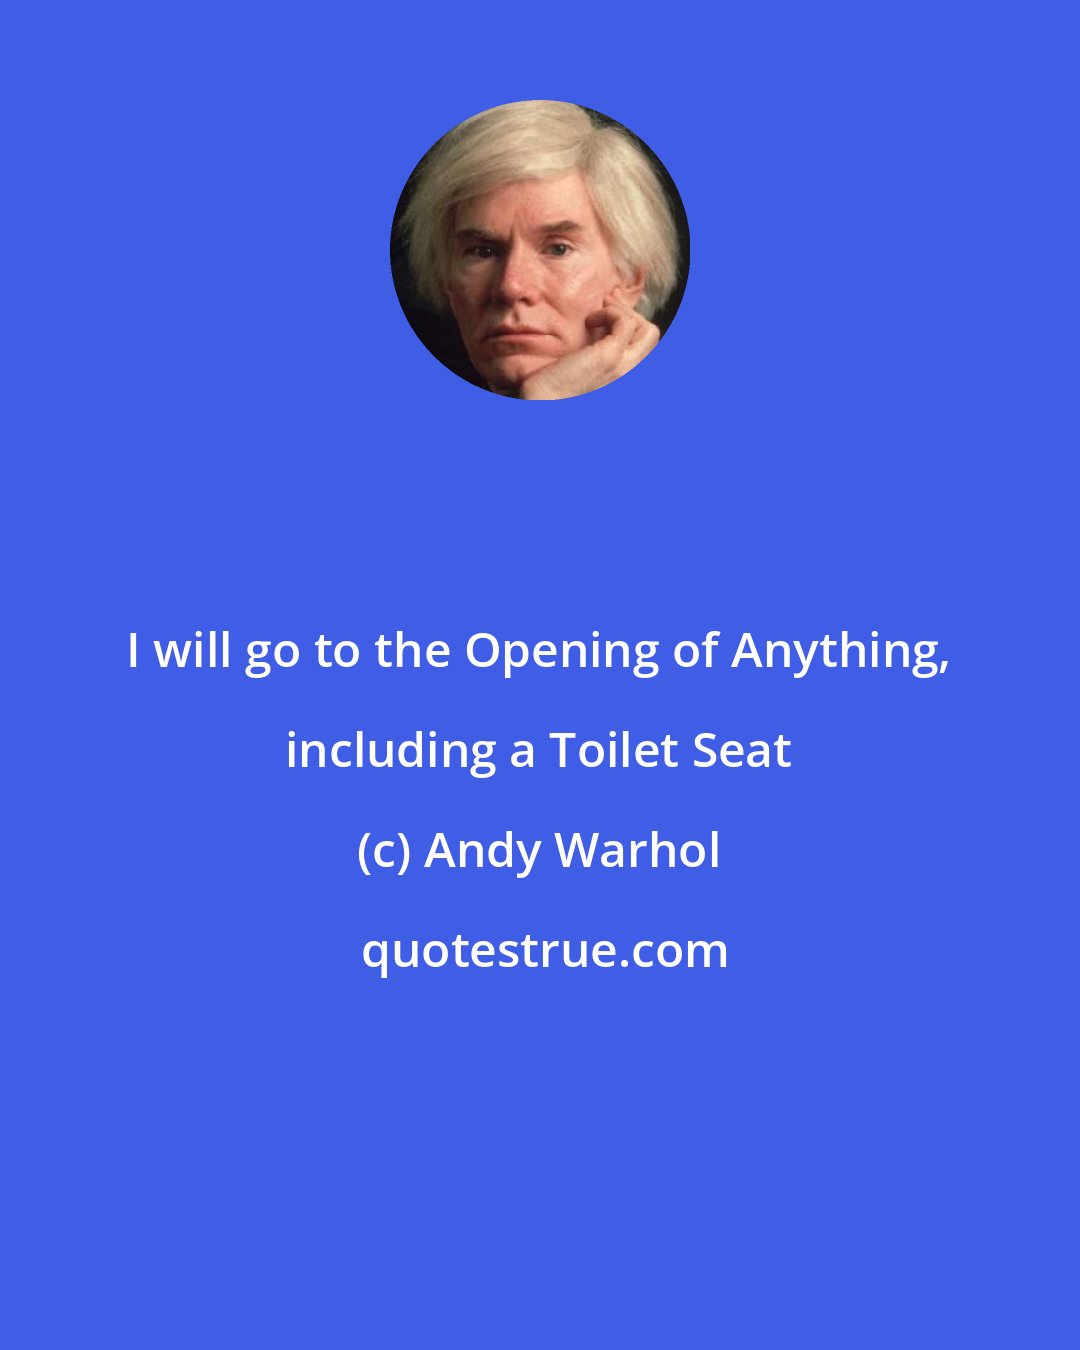 Andy Warhol: I will go to the Opening of Anything, including a Toilet Seat